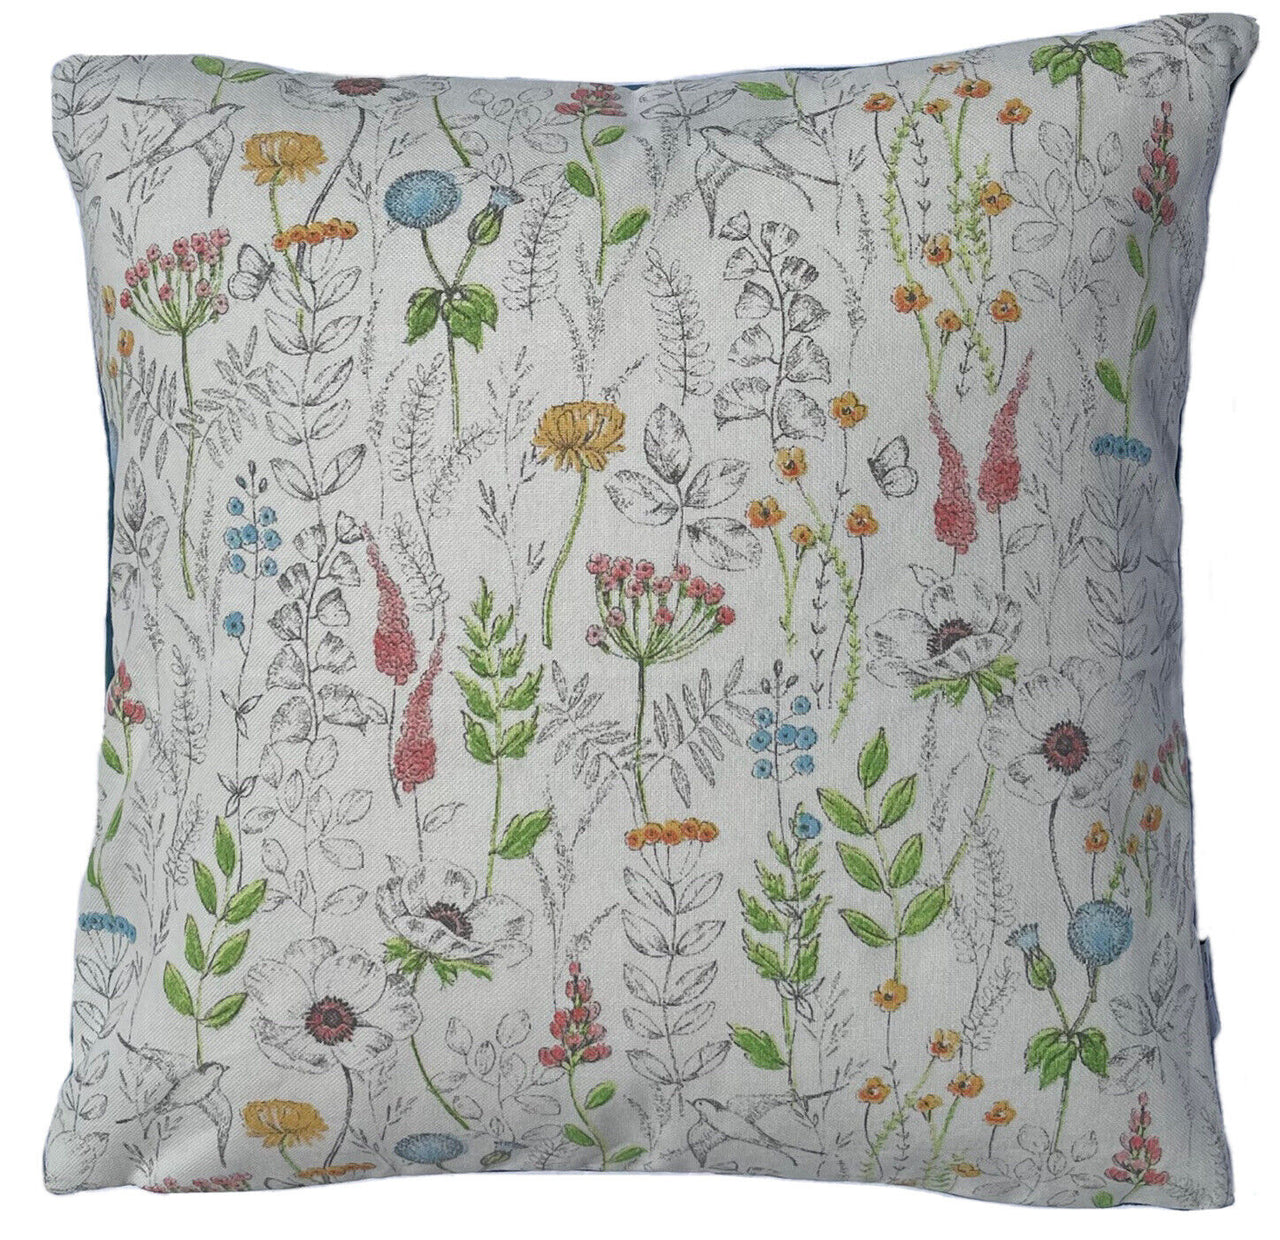 Floral Fields Cushion Cover Cotton Plants Botanical Flowers Leaves Butterfly